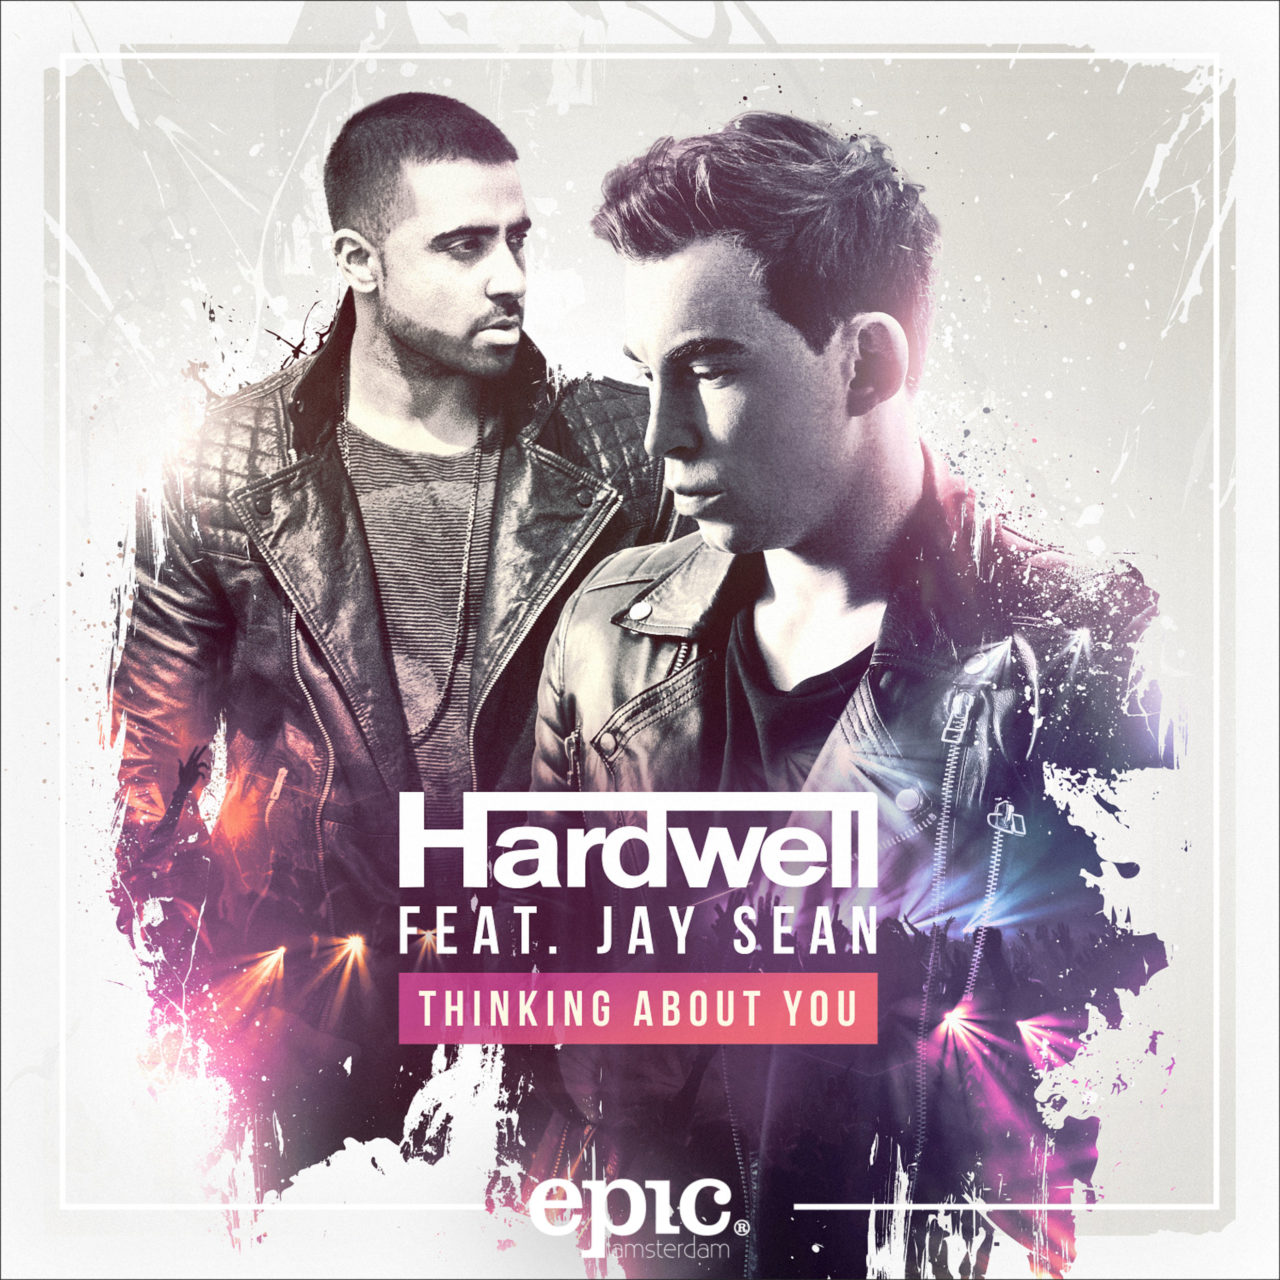 hardwell-thinking-about-you-2016-2480x2480